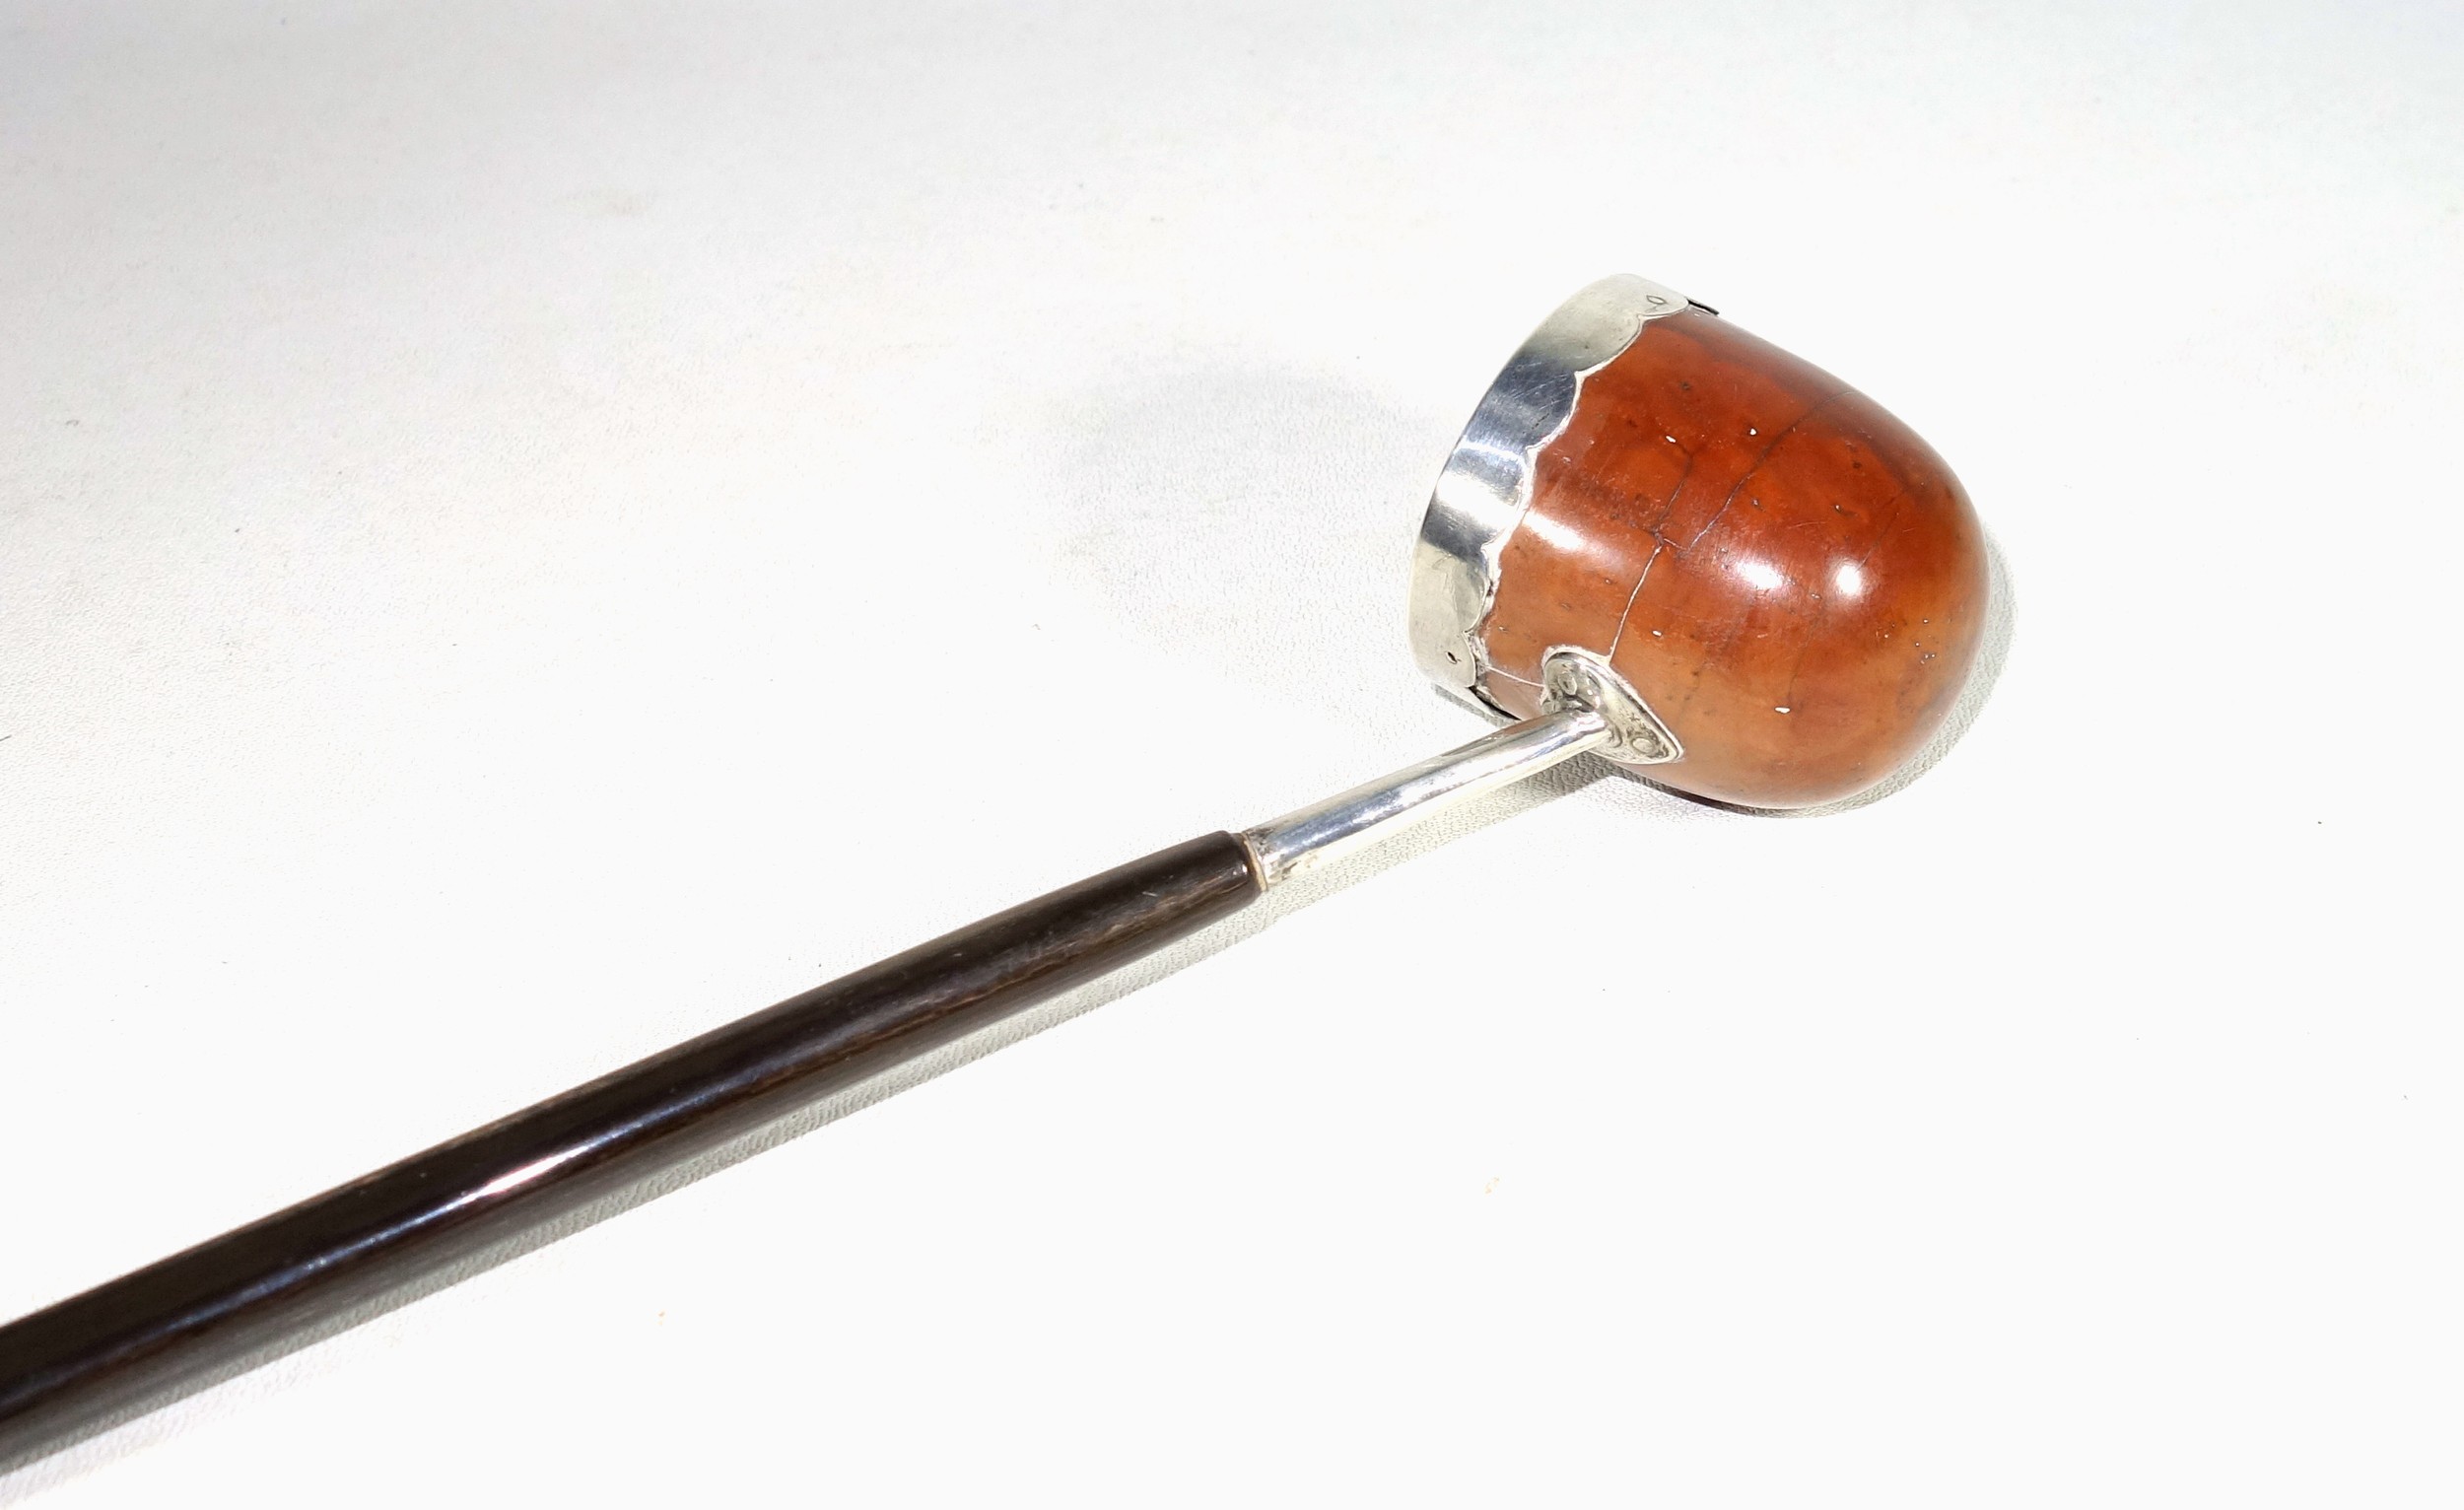 Georgian toddy ladle with a coquilla nut bowl and silver mounted rim, on a twisted whalebone handle, - Image 3 of 4